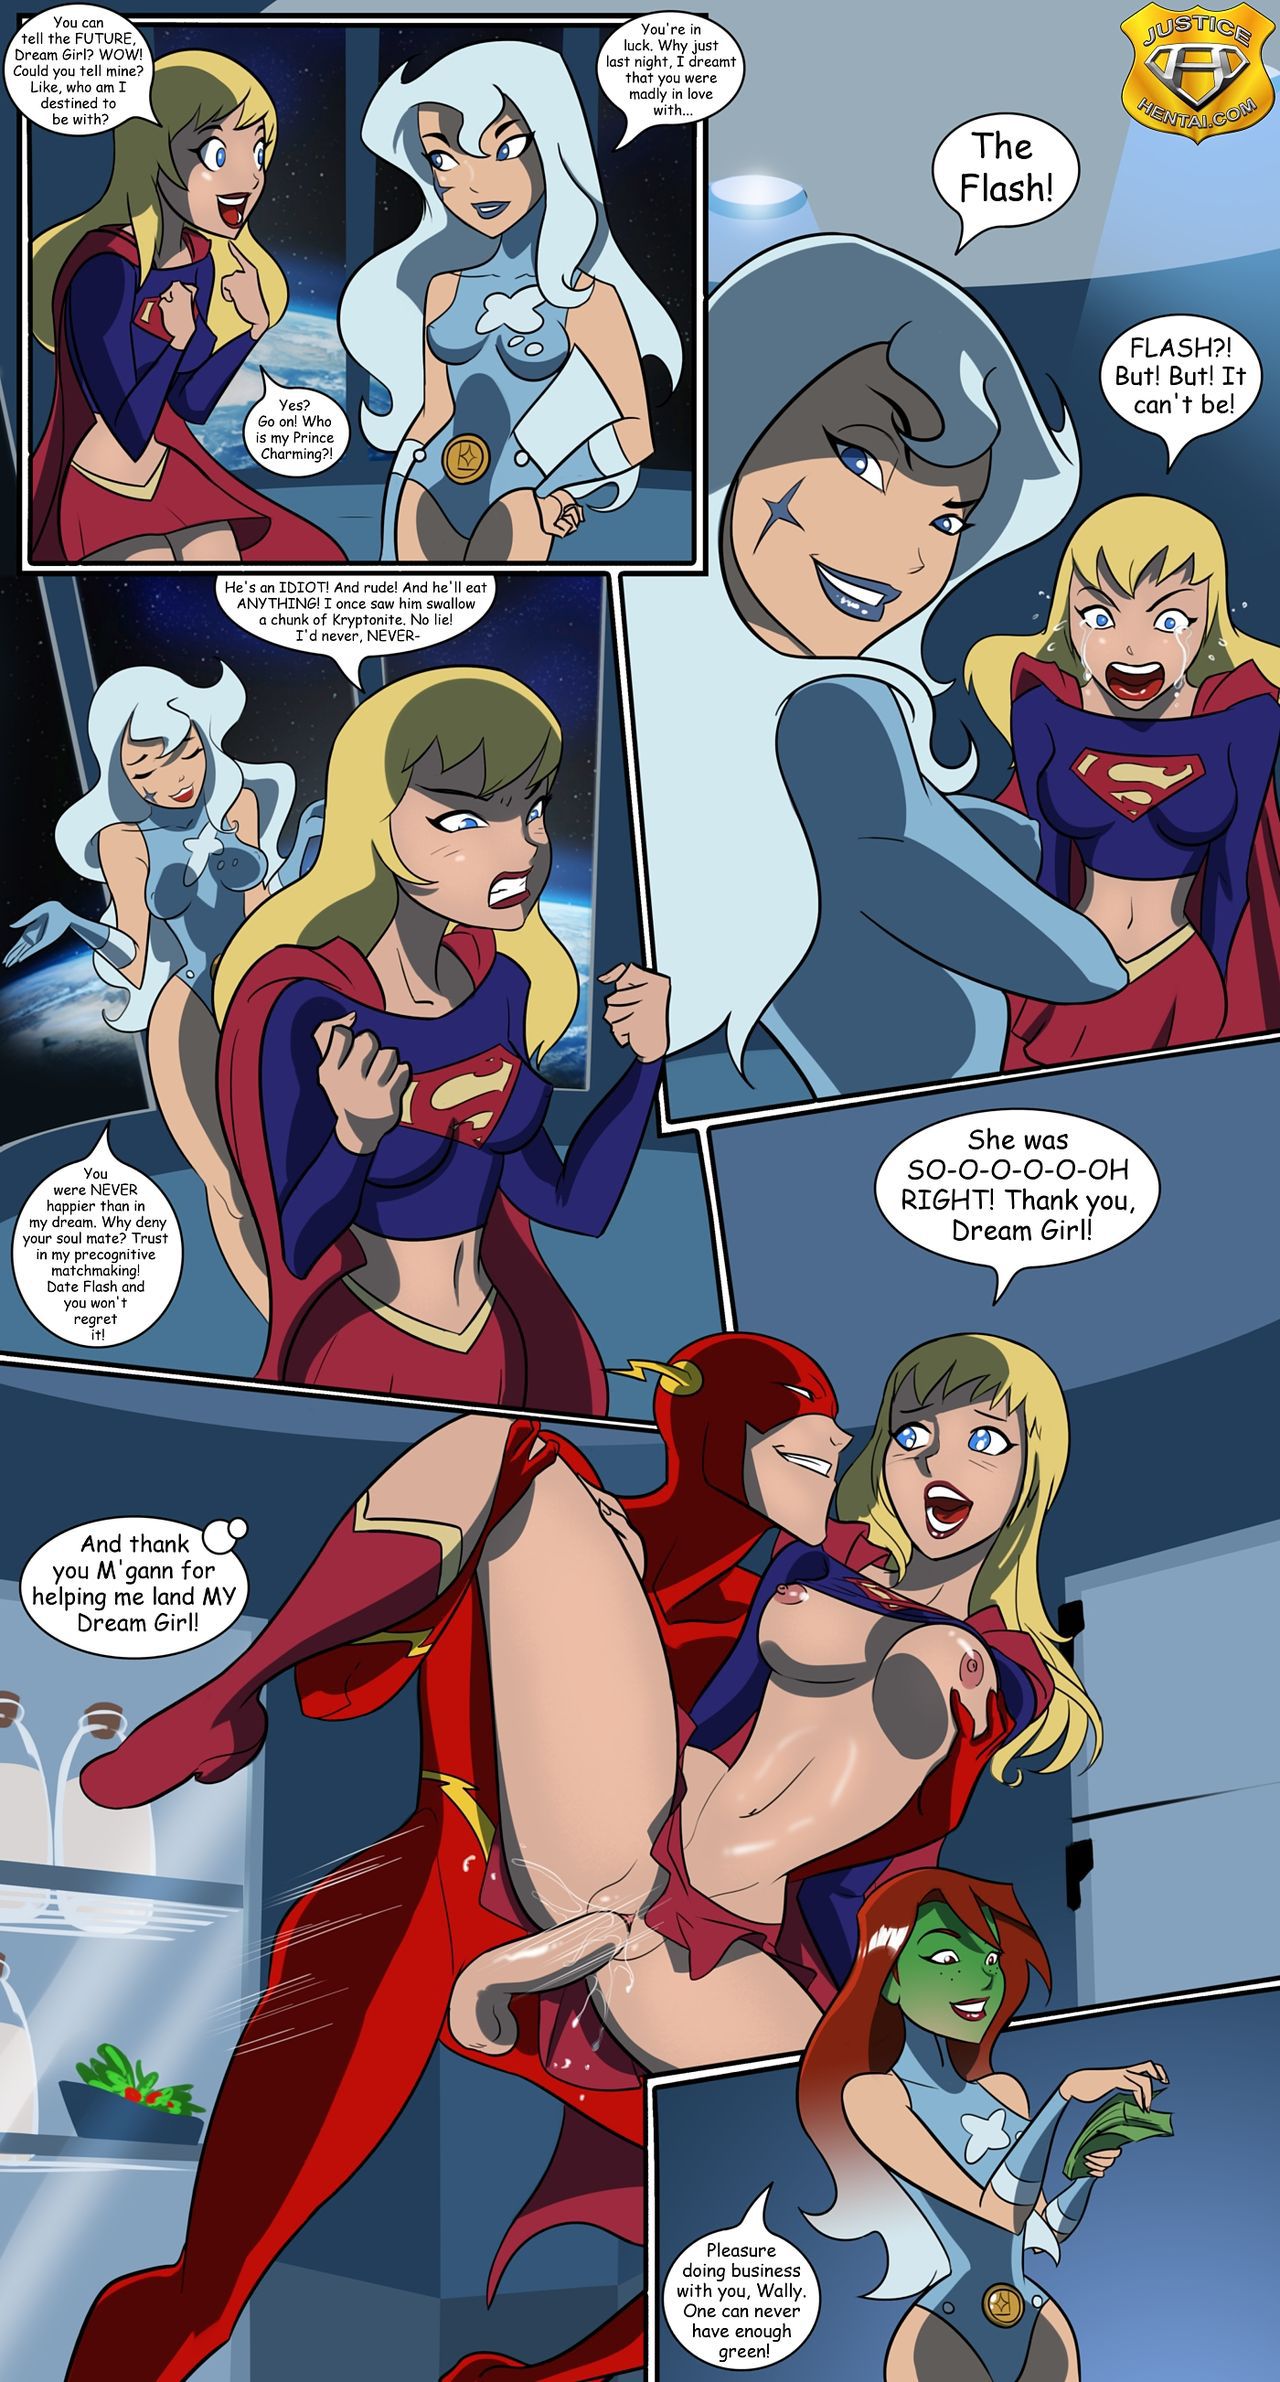 [JusticeHentai.com]New from Justice Hentai (Various Superheroines) (updating) 52